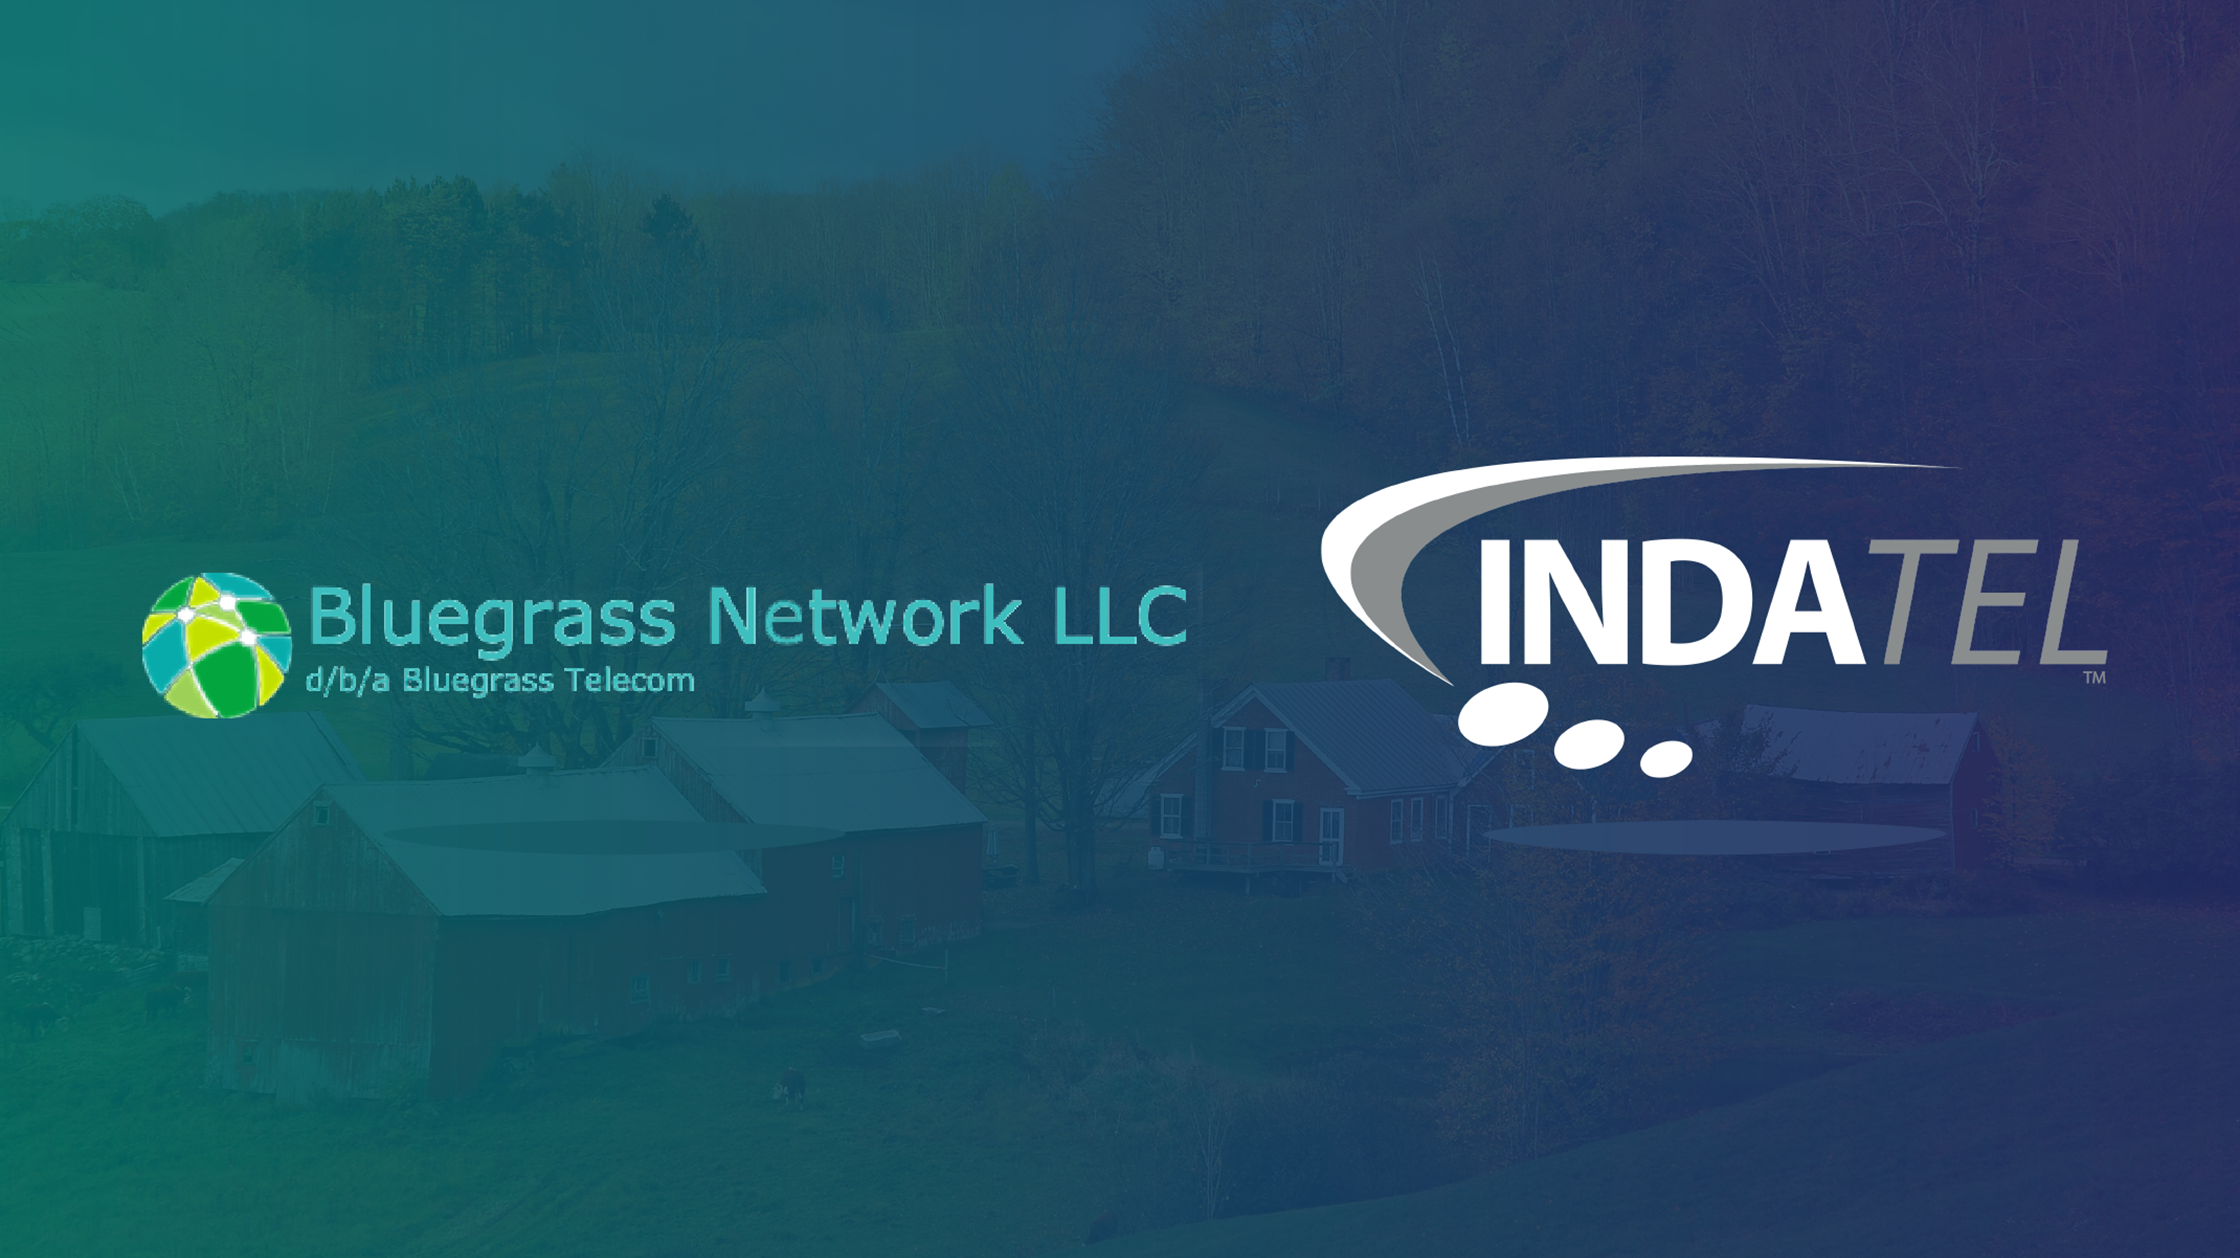 INDATEL Welcomes Bluegrass Network as New Member image